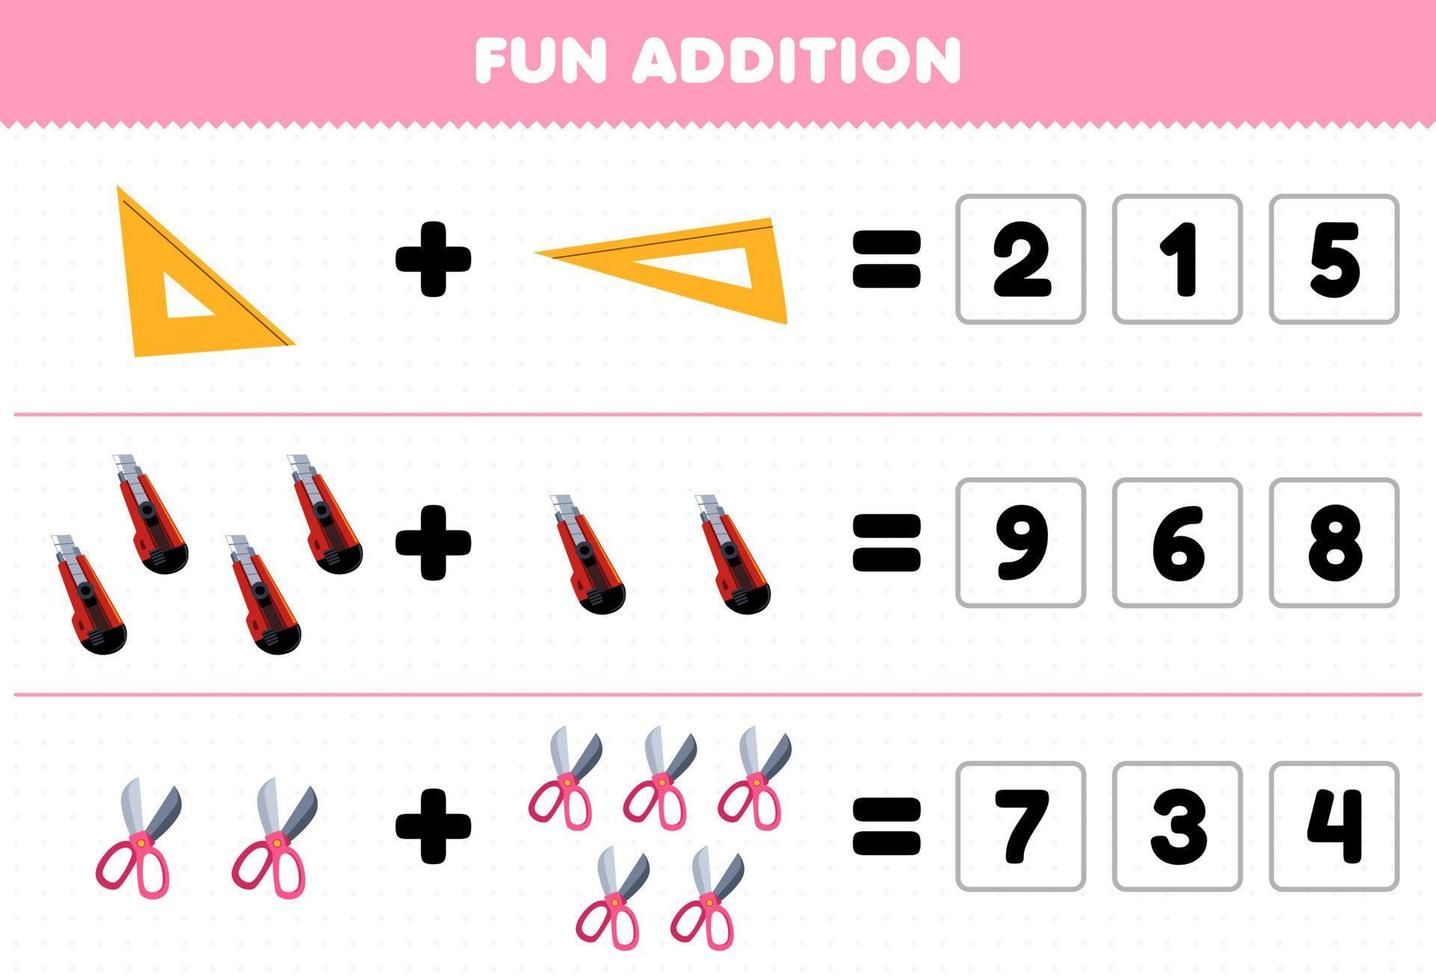 Education game for children fun addition by guess the correct number of cute cartoon ruler cutter scissor picture printable tool worksheet vector